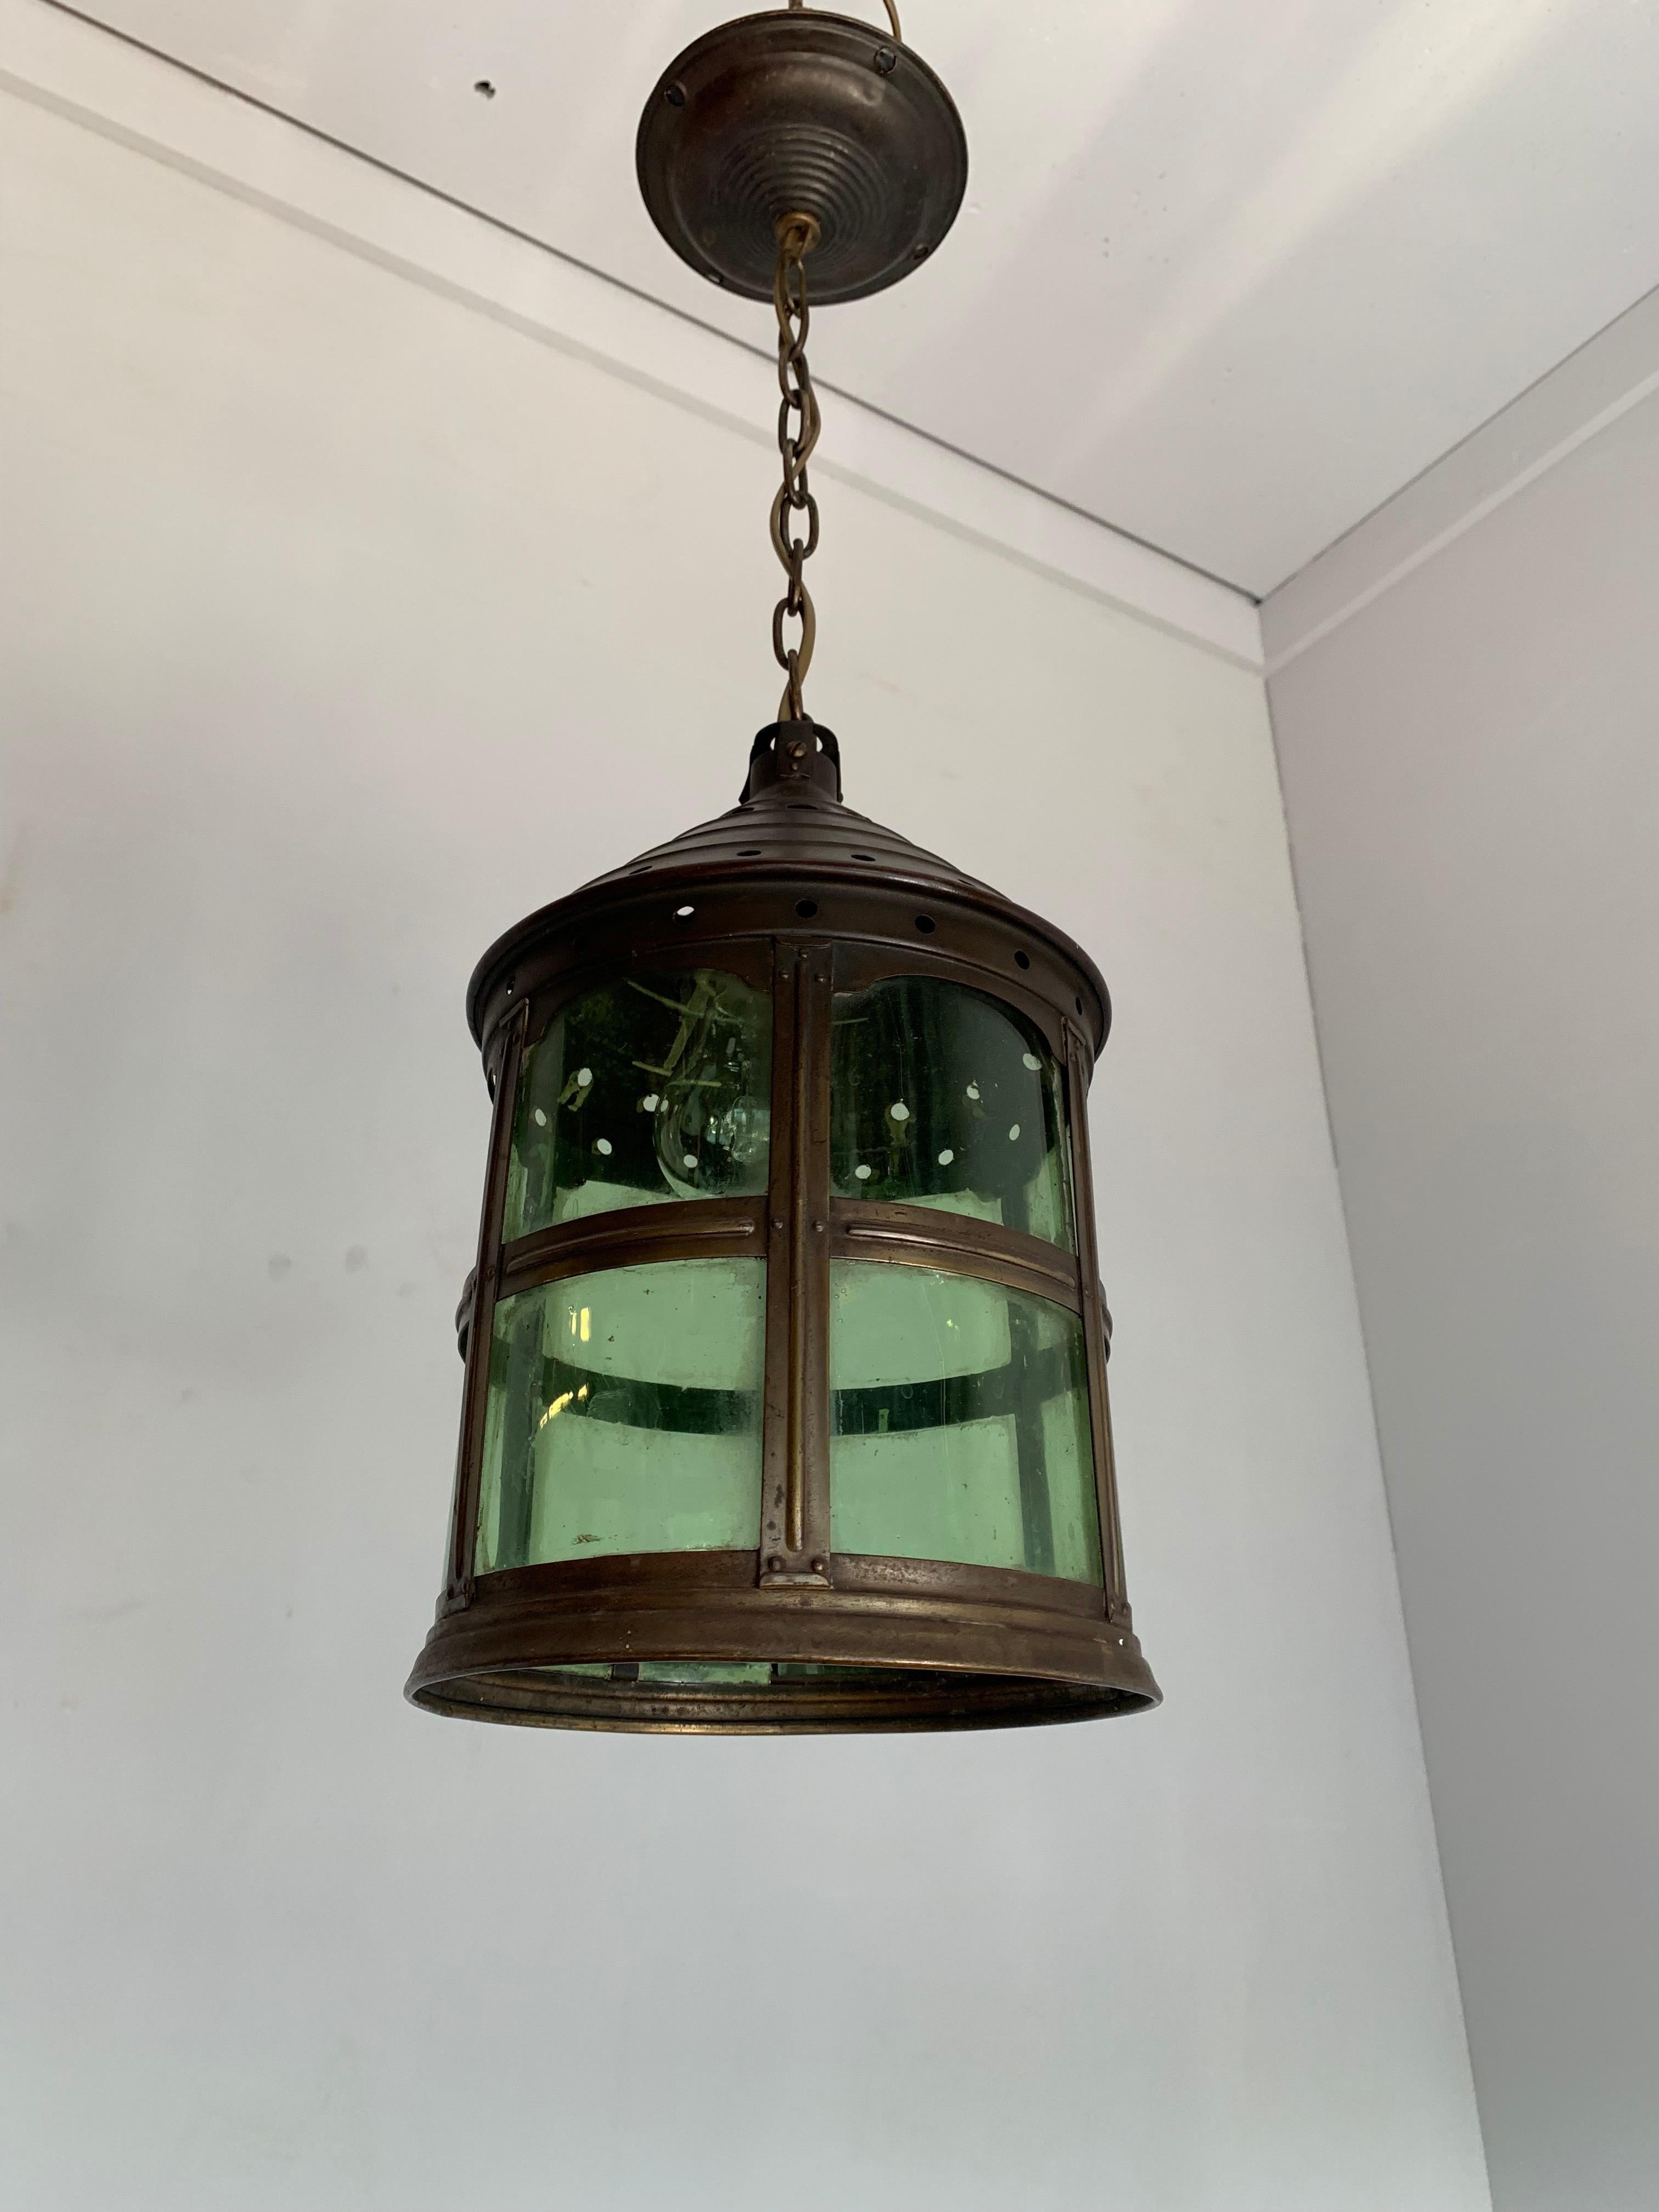 Unique and all handcrafted, round light fixture.

If you are looking for a stylish and quality crafted lantern to grace your entry hall, landing or bedroom then this Arts & Crafts beauty could be perfect for you. This early twentieth century light